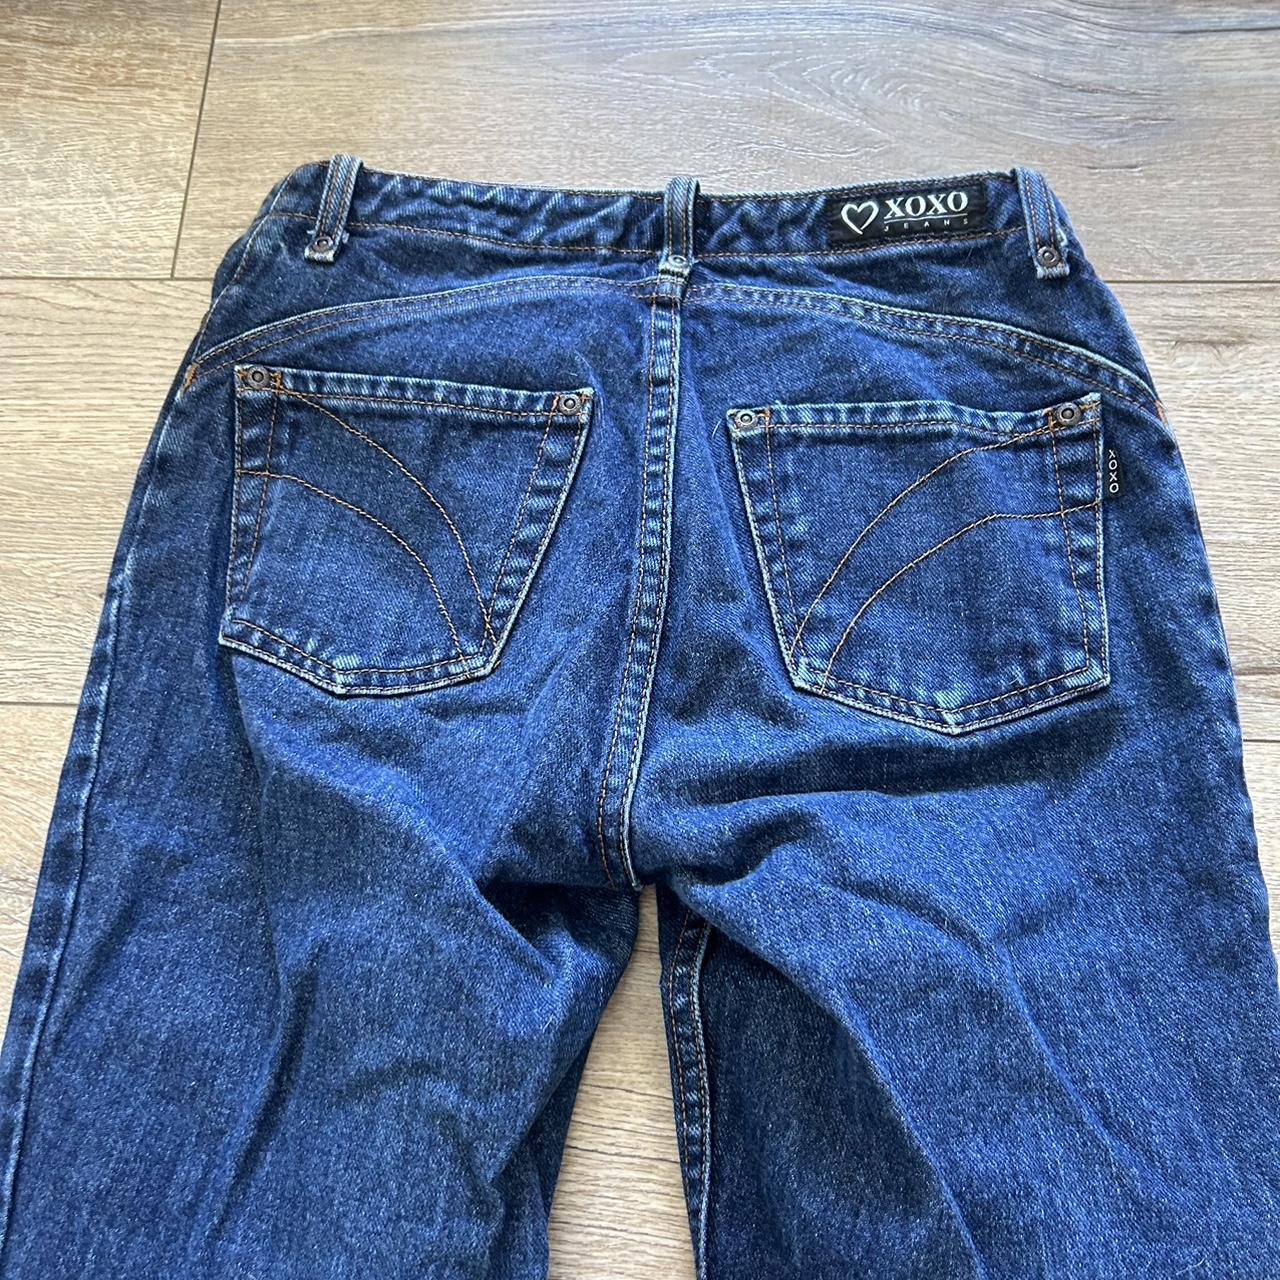 XOXO Women's Navy and Blue Jeans | Depop